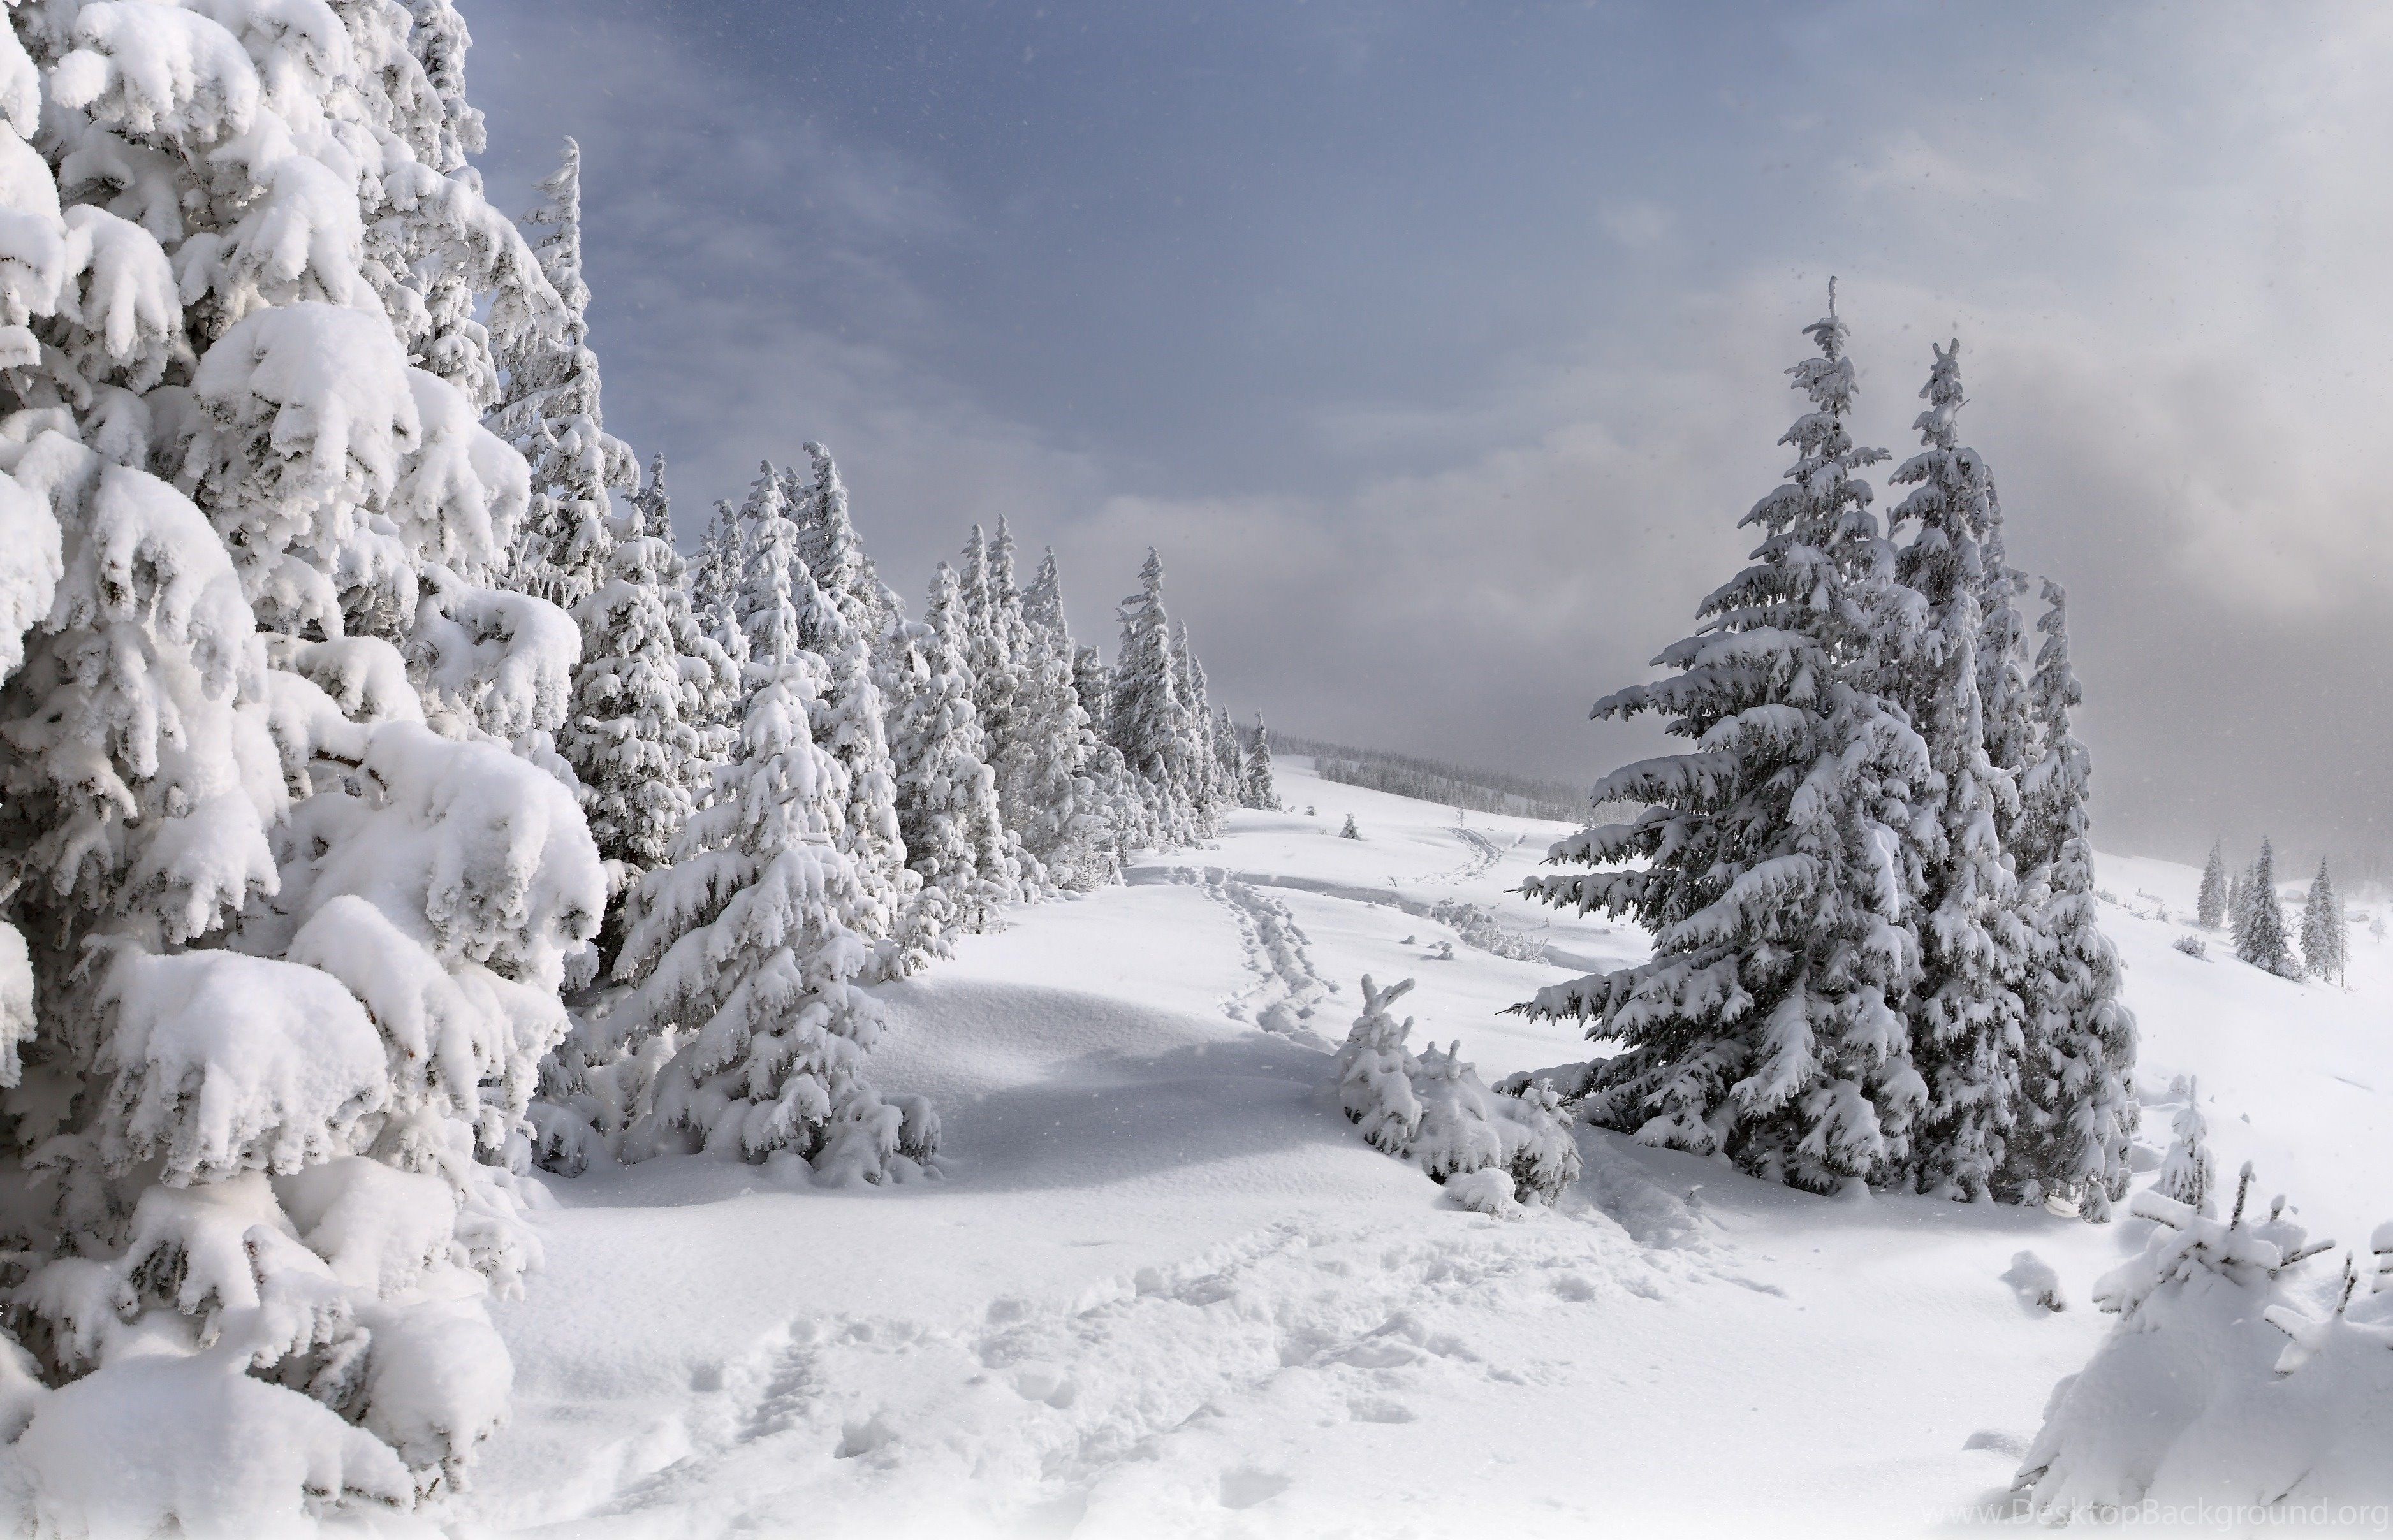 Christmas Tree Covered With Snow Wallpaper And Image. Desktop Background